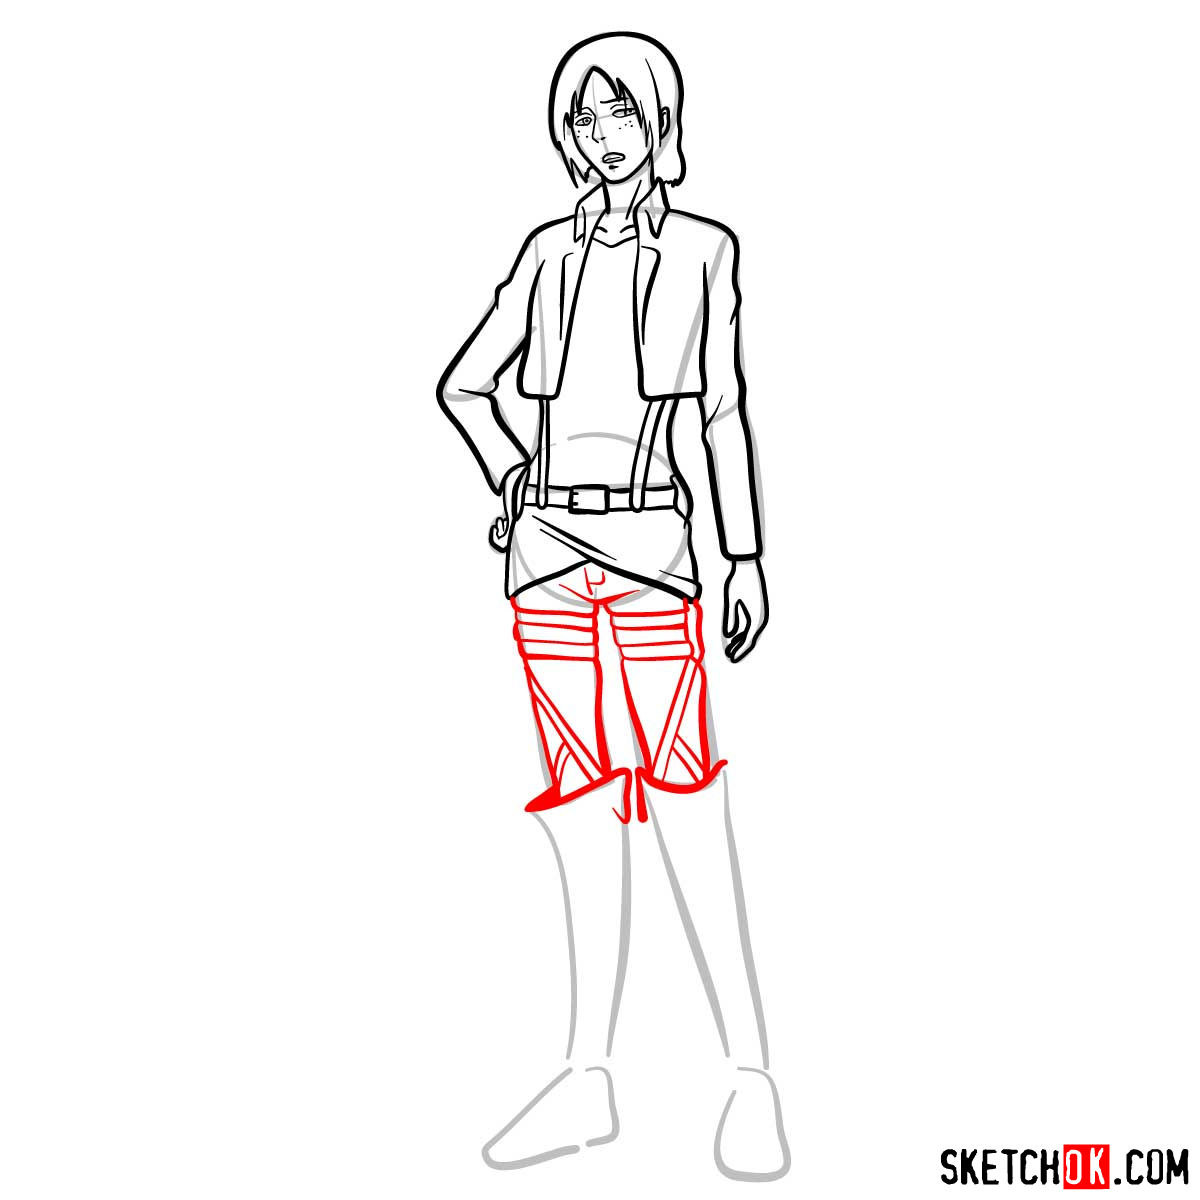 How to draw Ymir from Attack on Titan - step 11